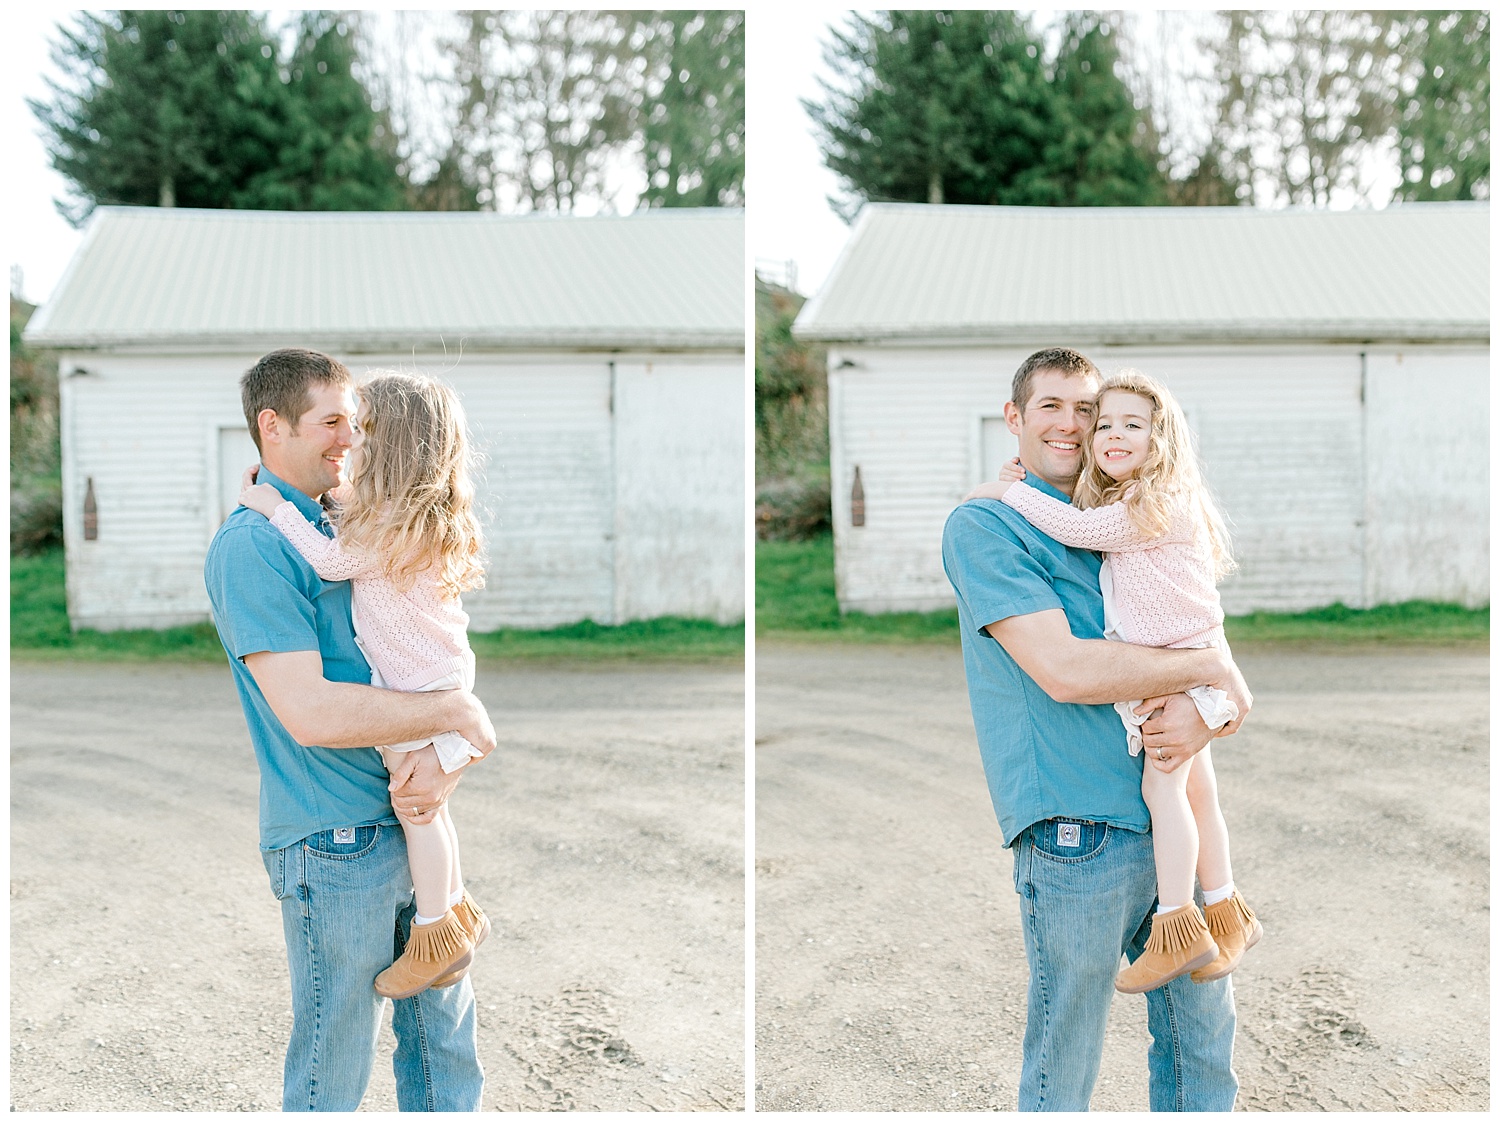 Emma Rose Company Seattle and Portland Wedding and Portrait Photographer | What to Wear for Family Pictures